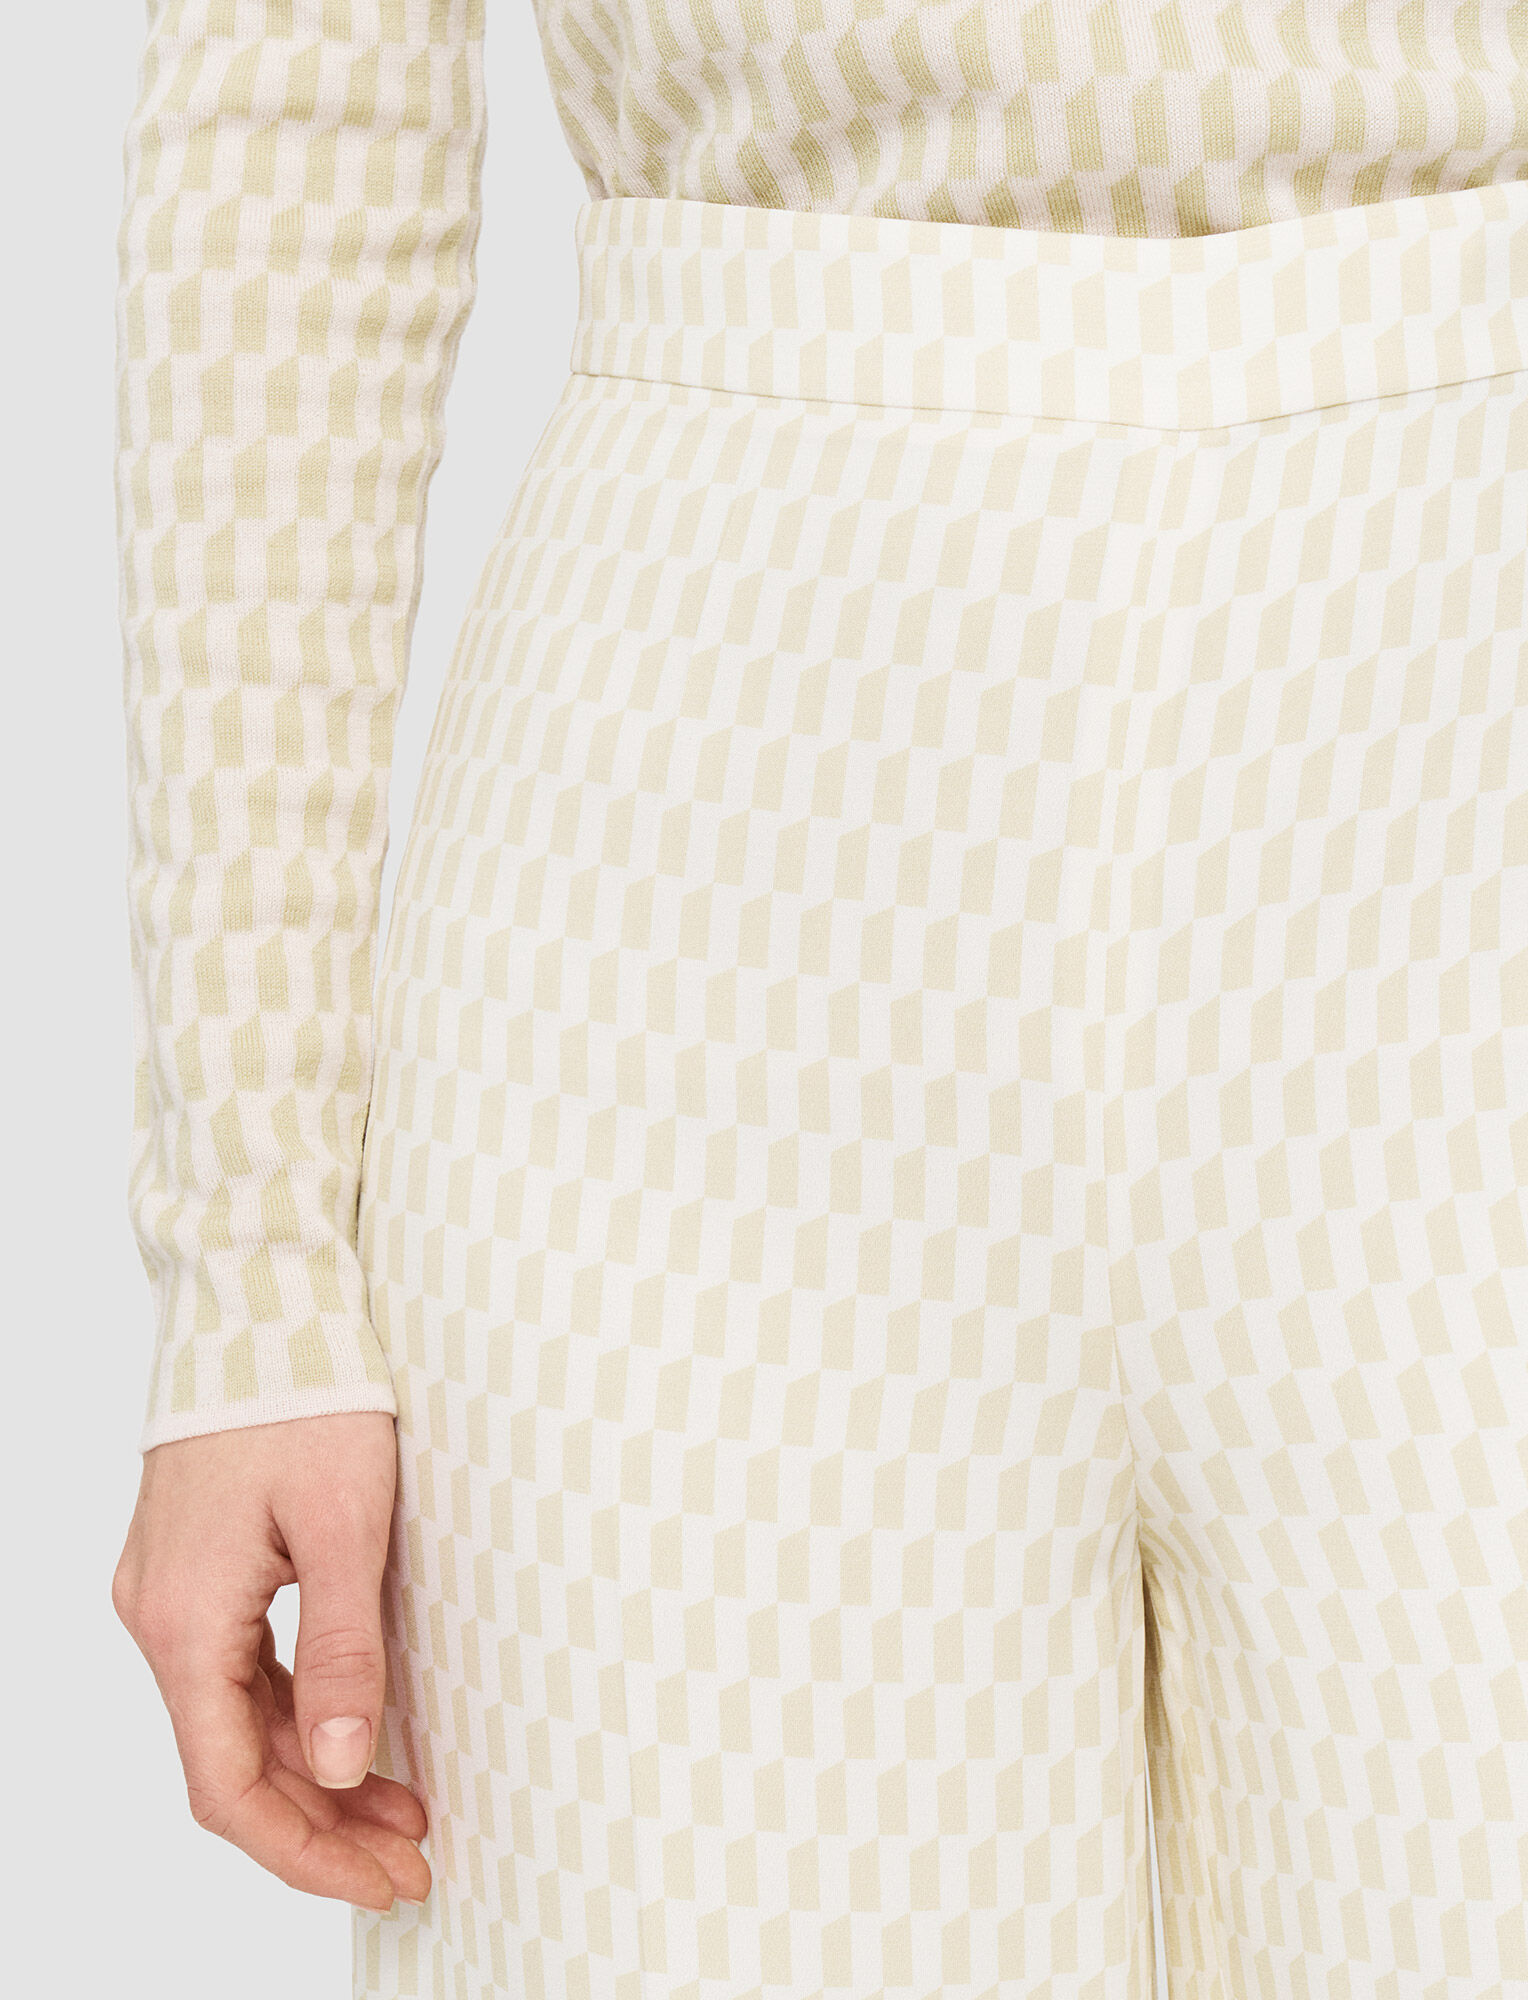 Joseph, Alcove Print Alane Trousers, in Pale Olive/Ivory